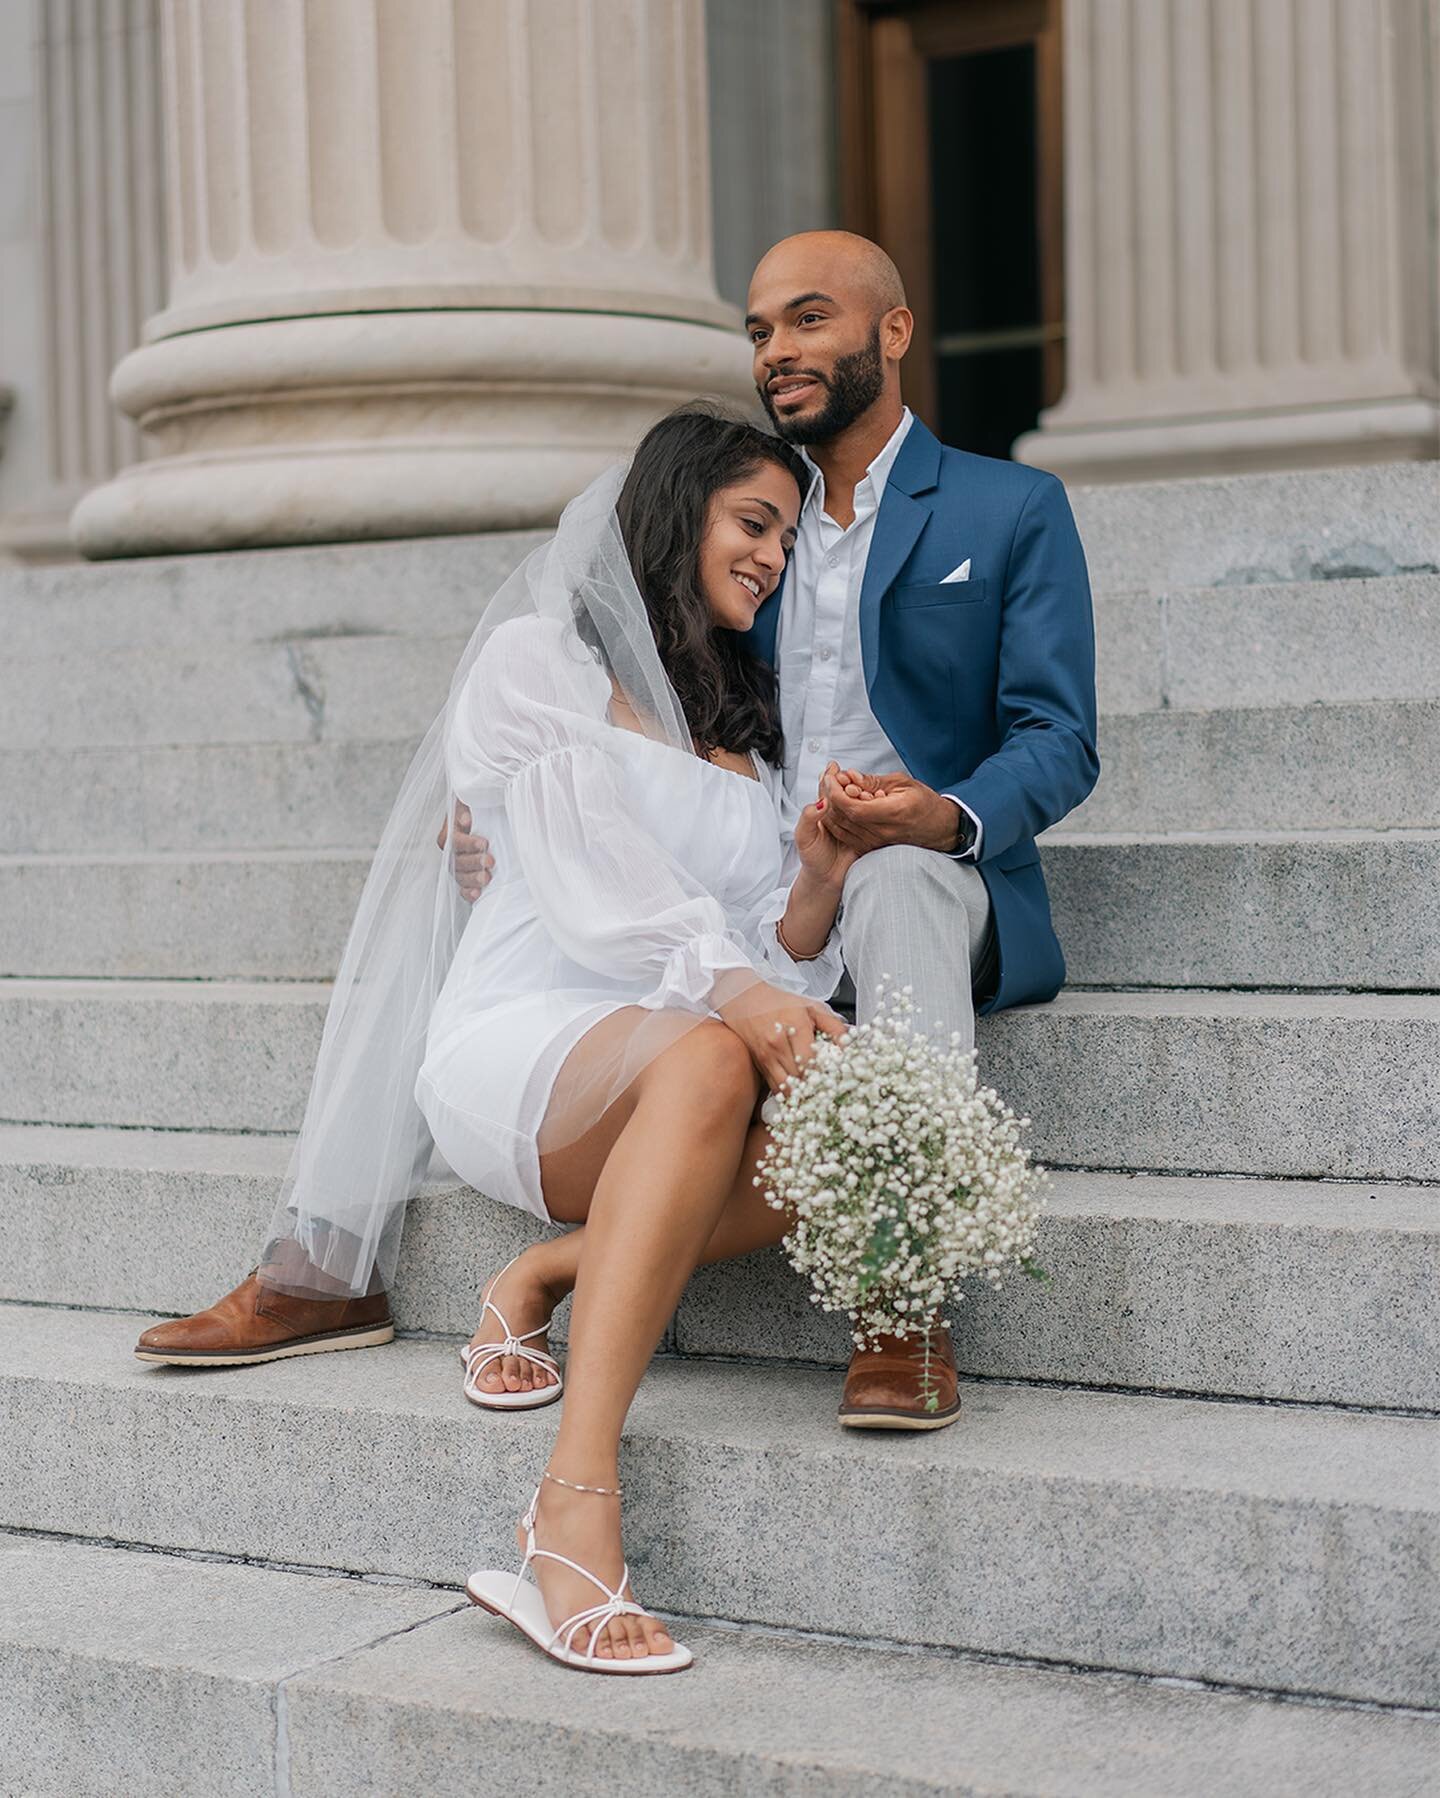 There&rsquo;s just something magical about  Charleston courthouse elopement ✨

#charlestonwedding #courthouseelopement #charlestonweddingphotographer #charlestonelopement #lovestory #destinationwedding #blufftonwedding